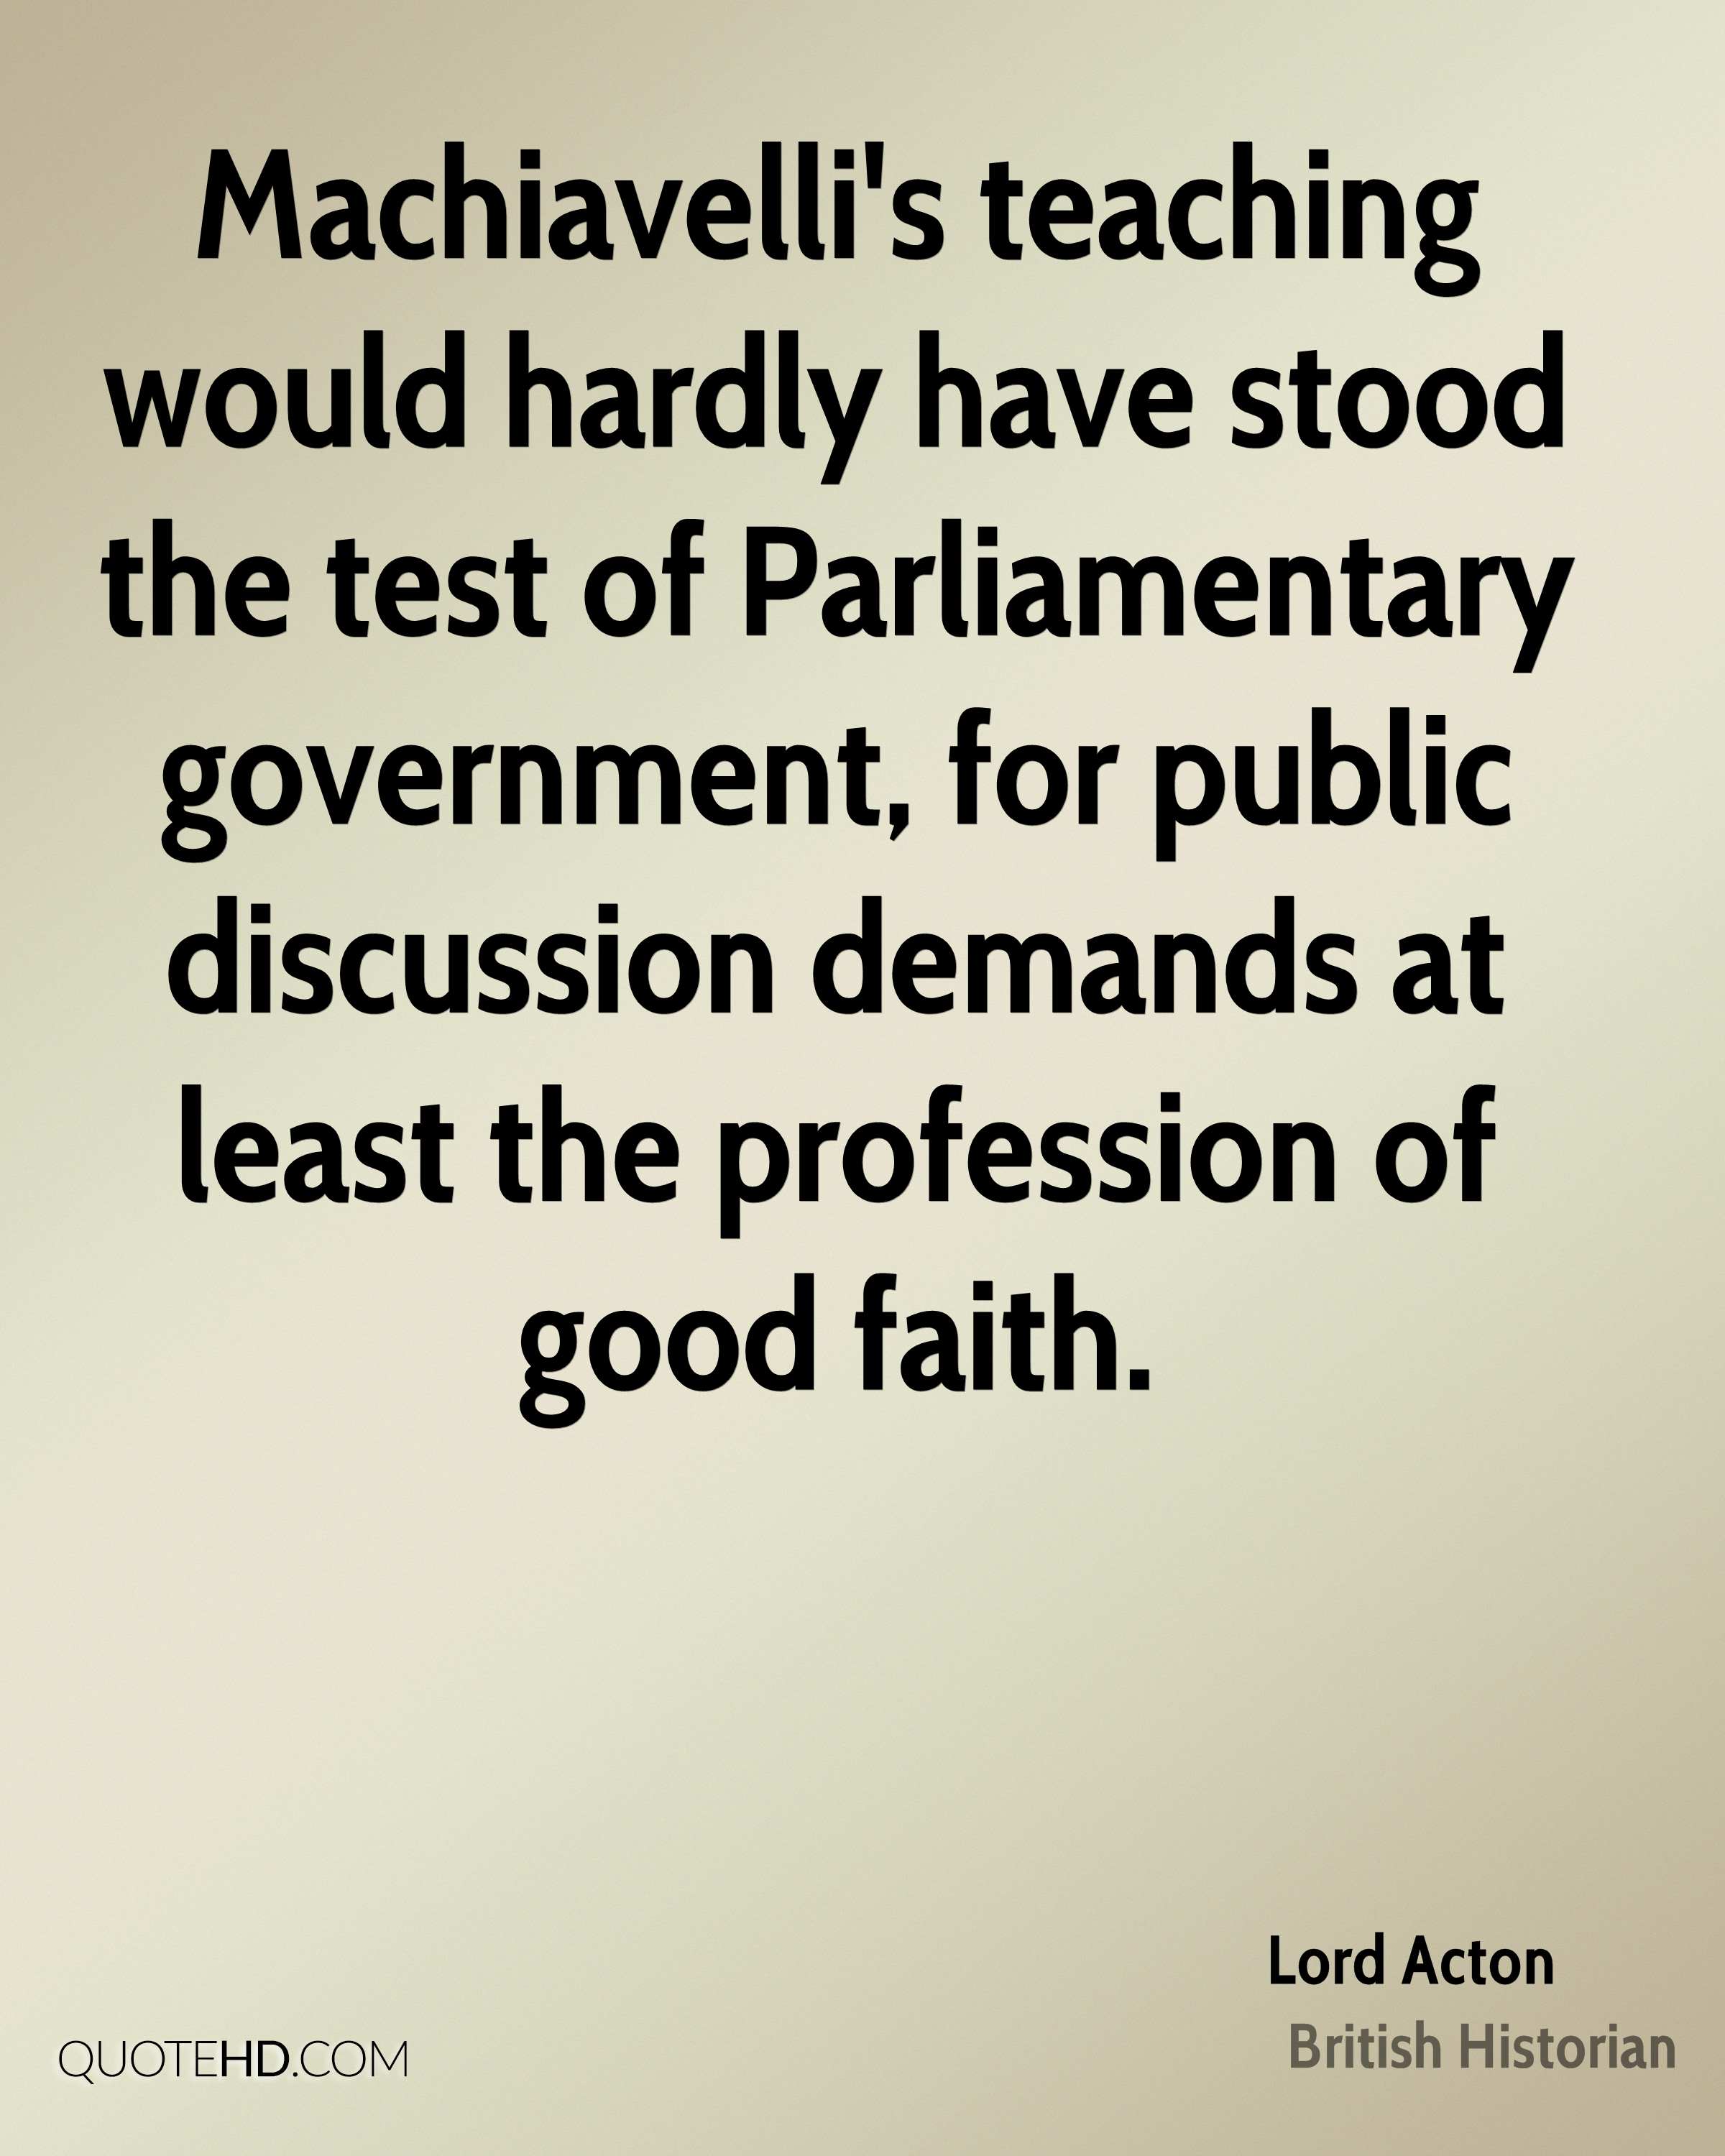 Machiavelli s teaching would hardly have stood the test of Parliamentary government for public discussion demands